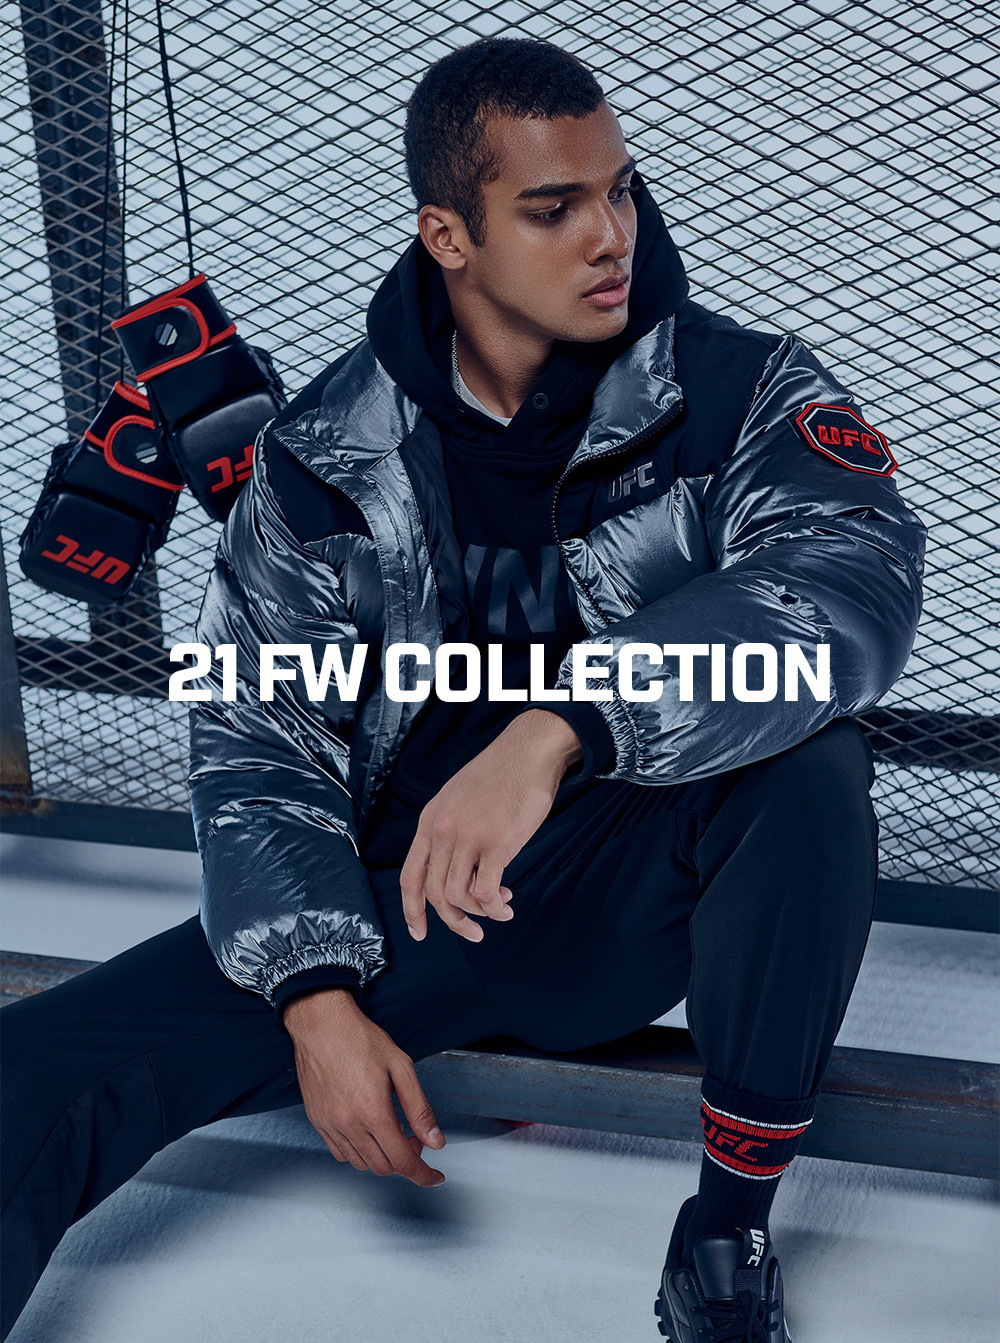 21 FW COLLECTION